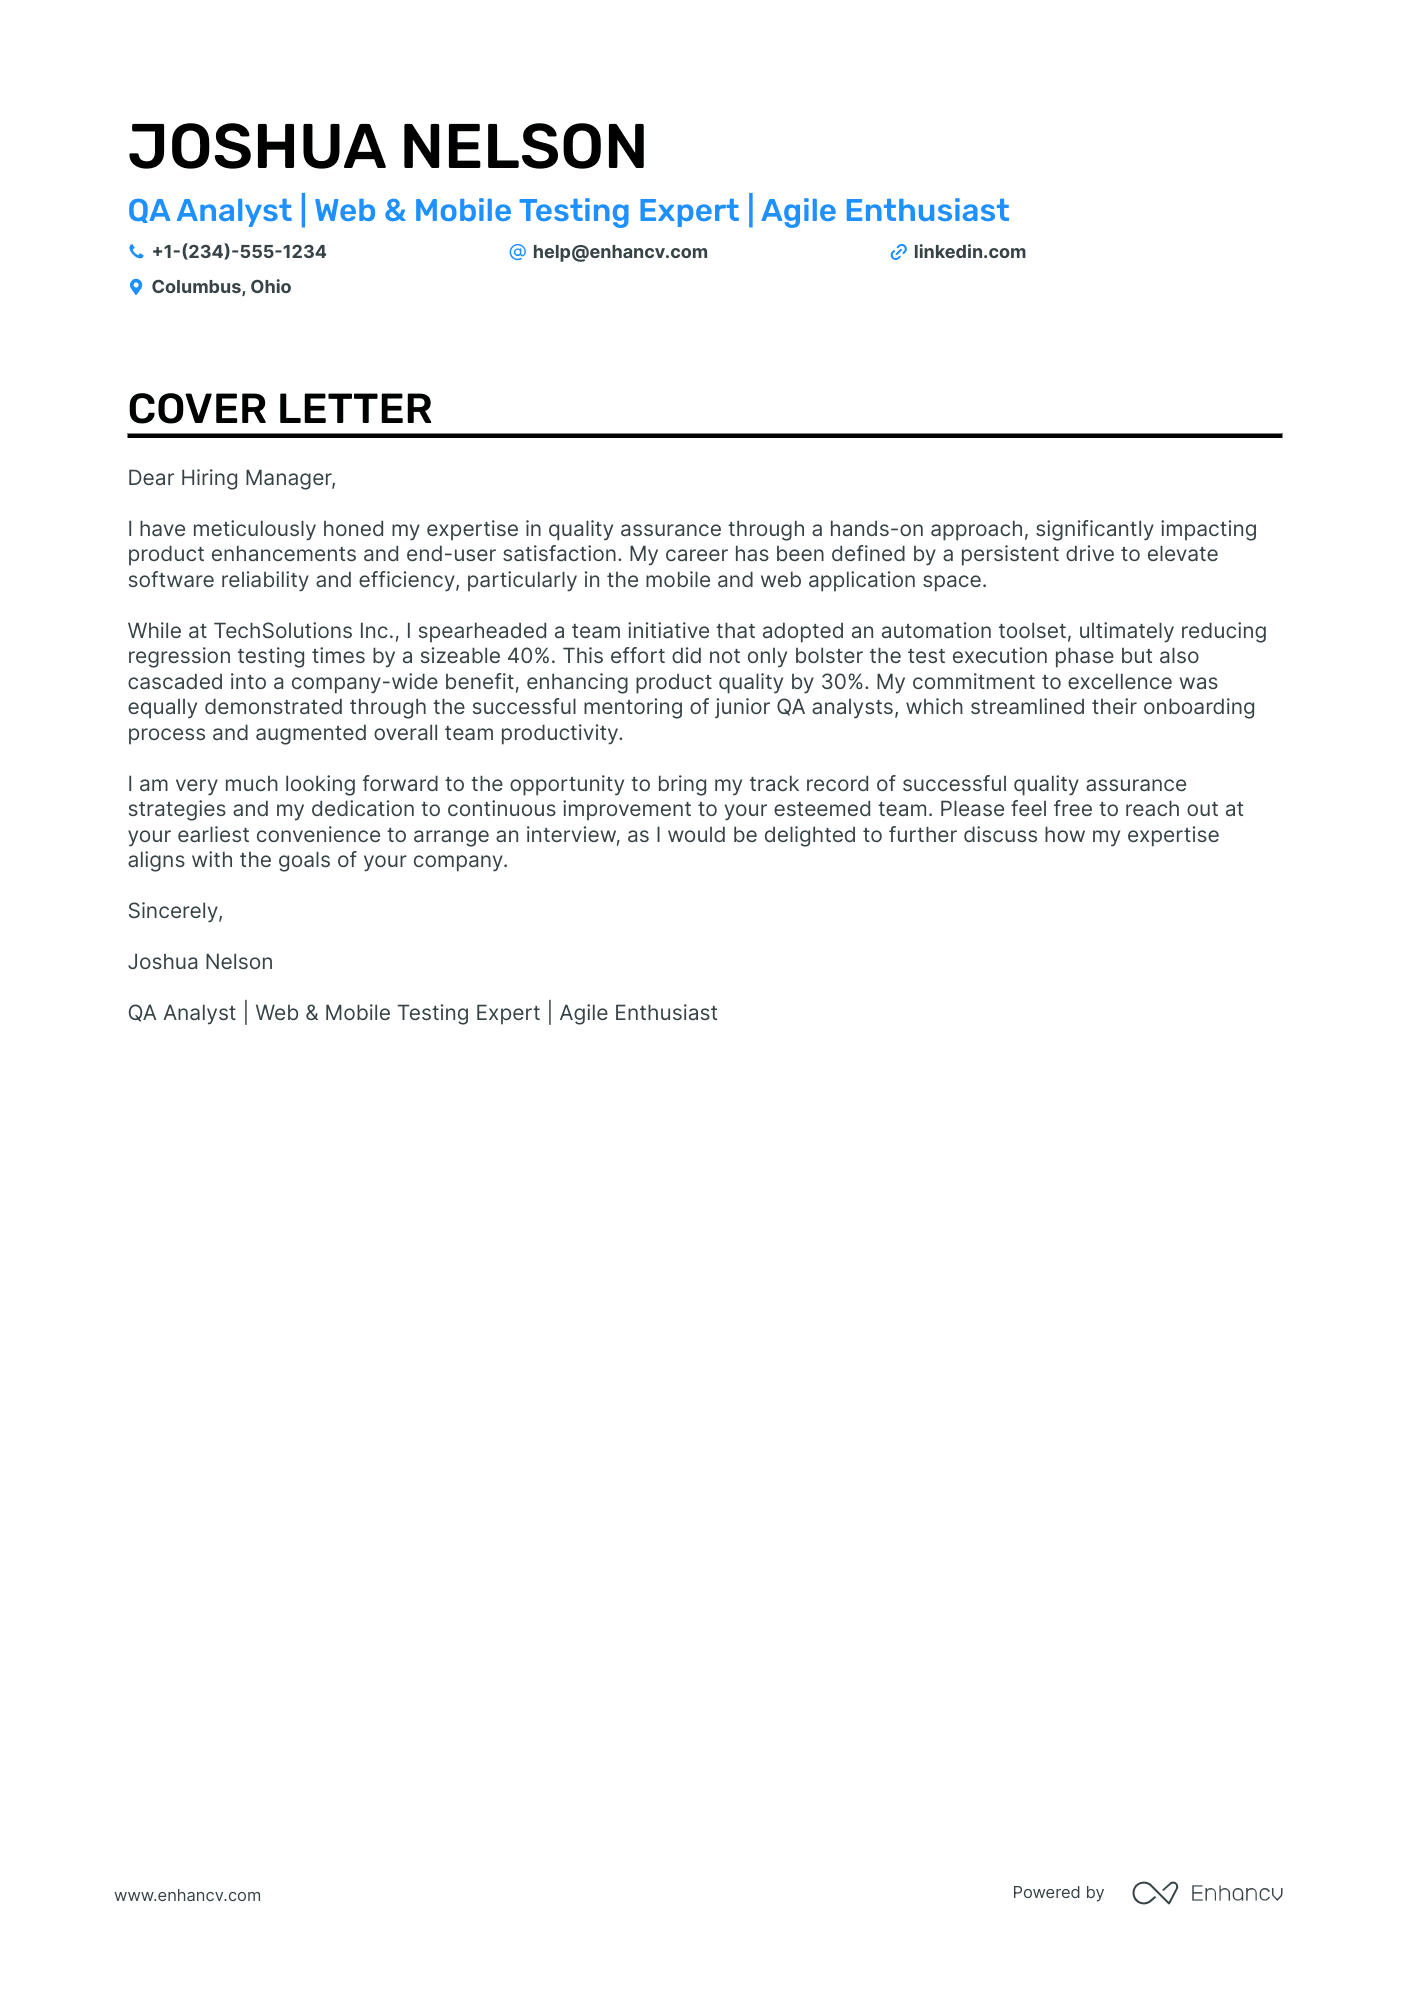 QA Analyst cover letter